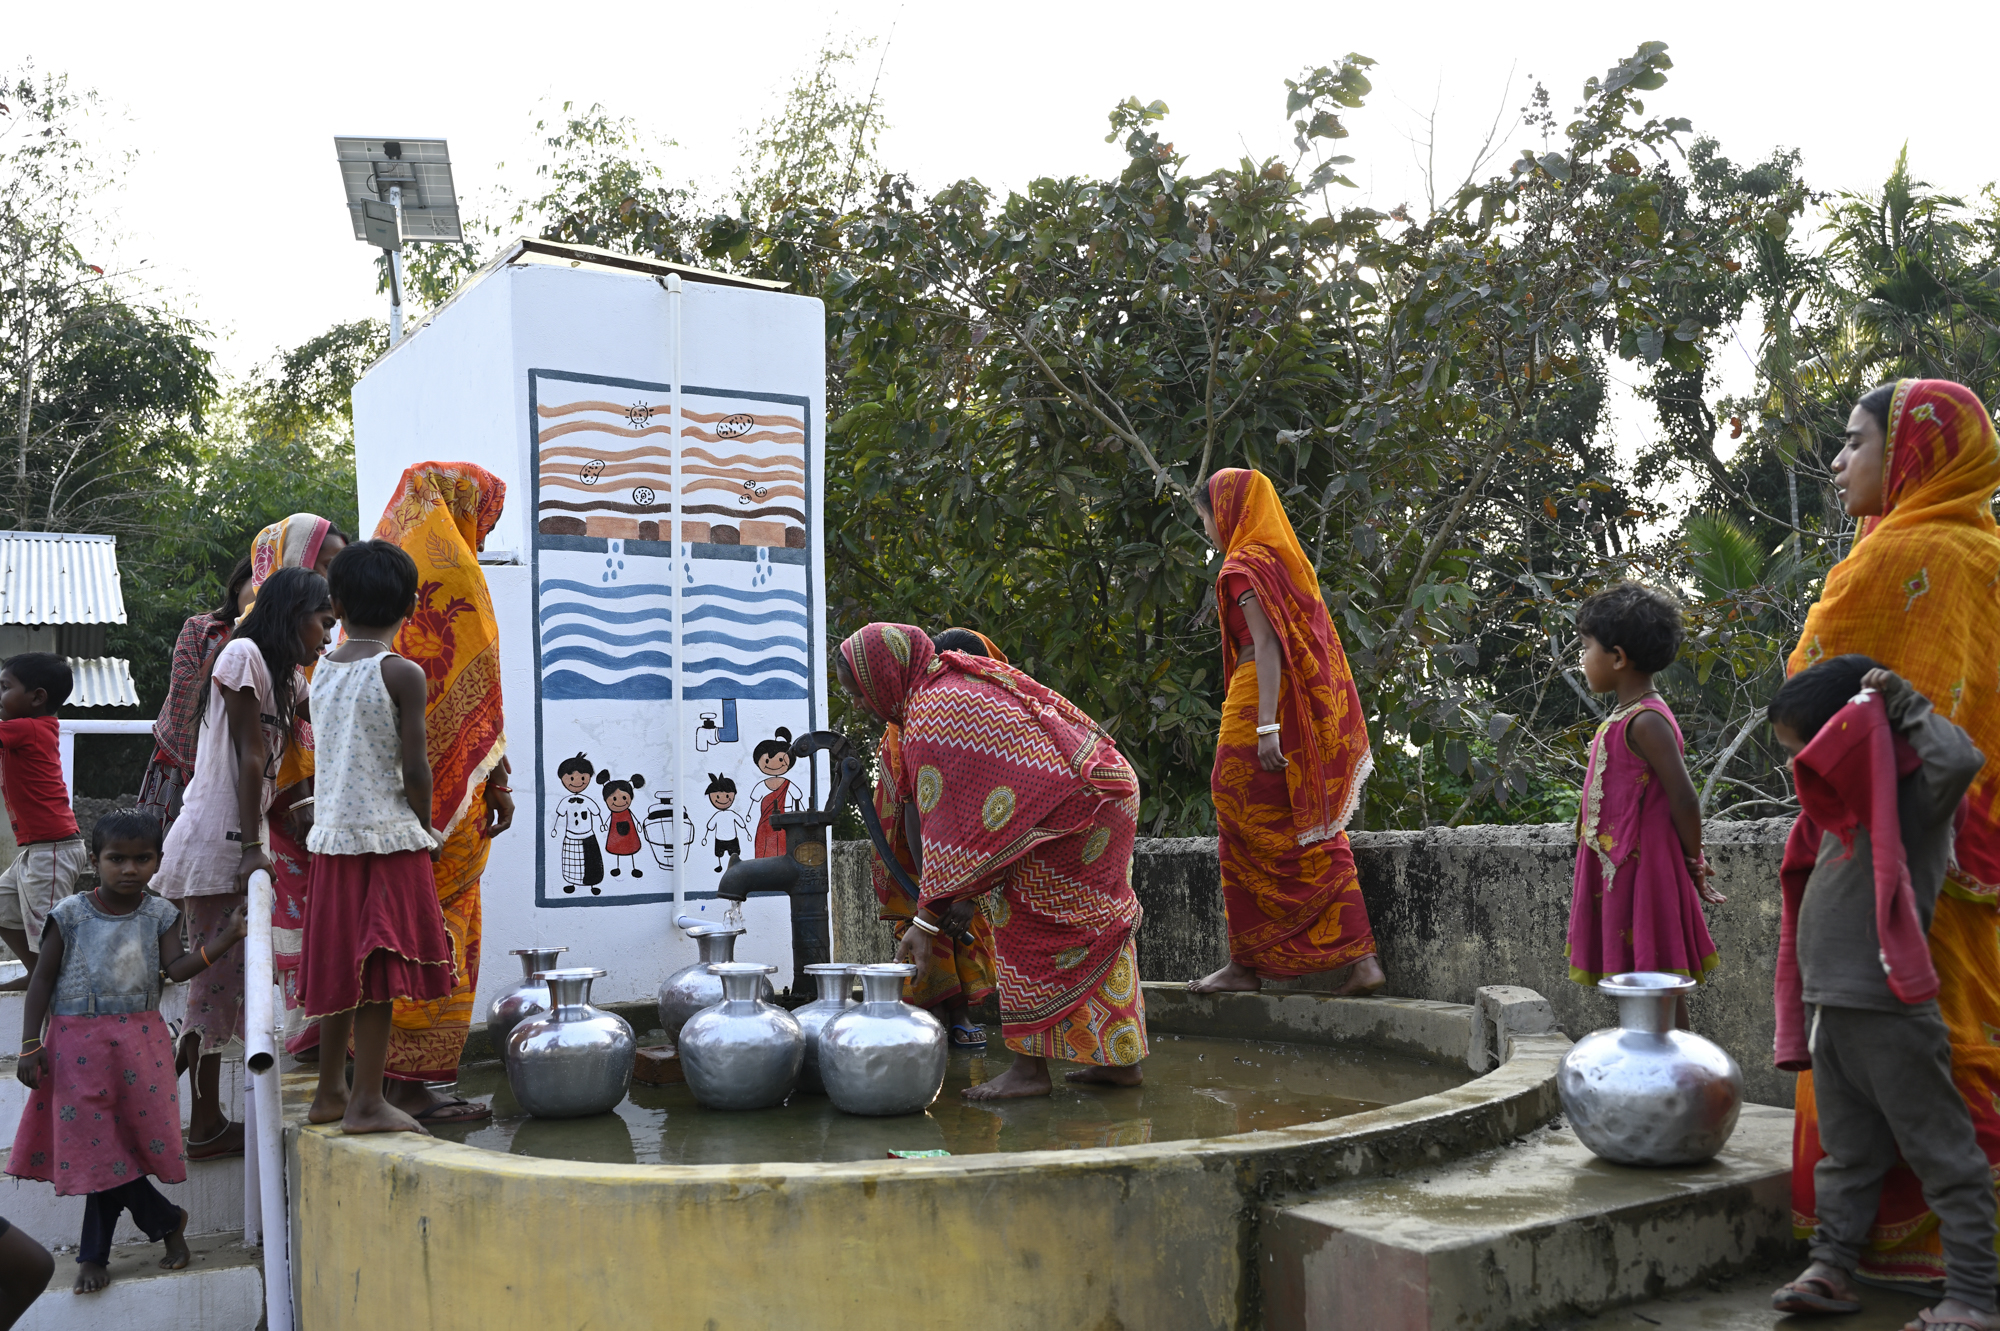 Community using terra filter to collect water